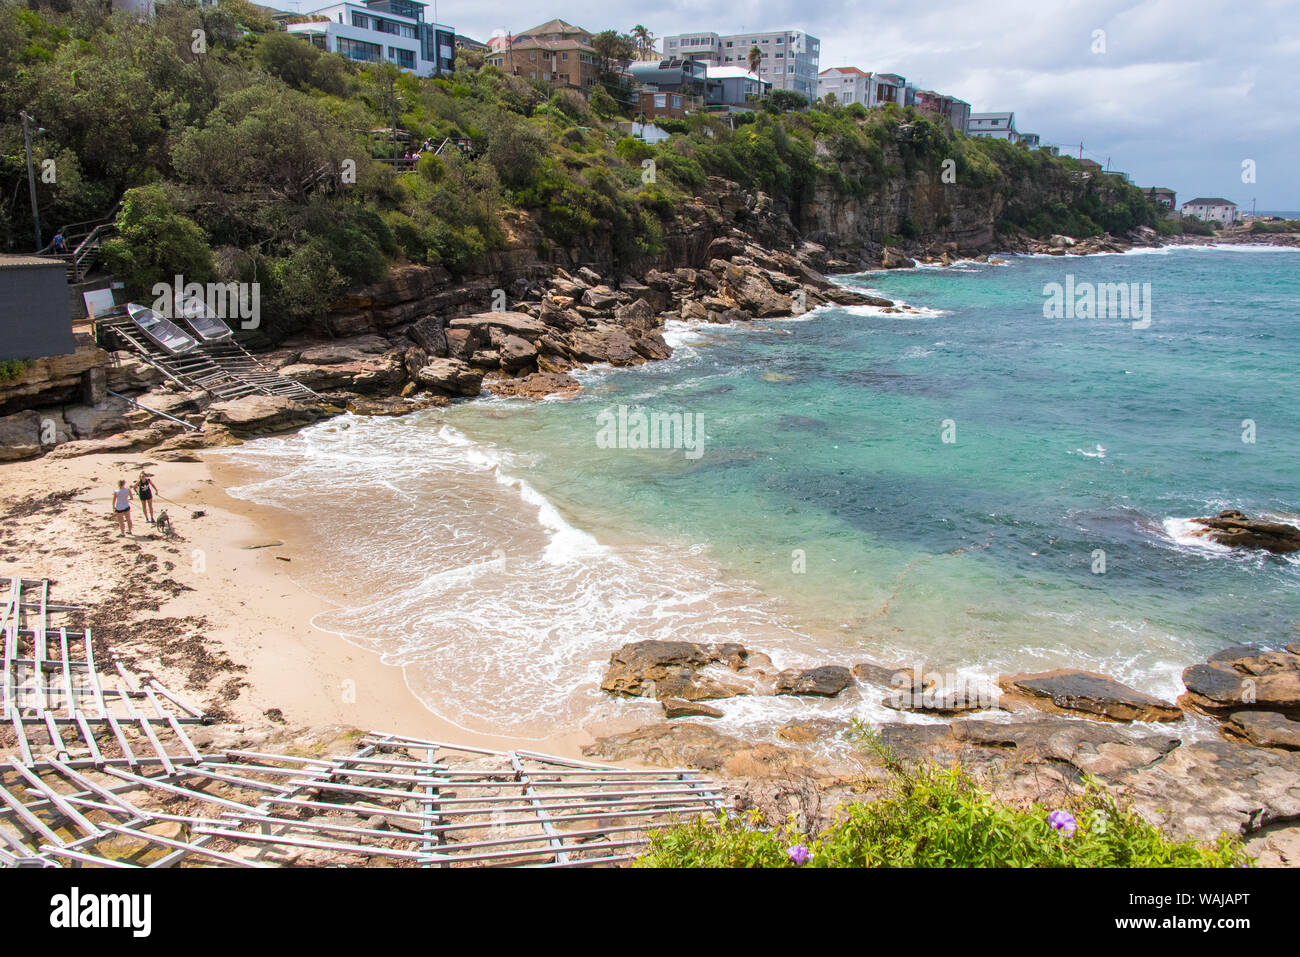 Australia, New South Wales, Sydney. Eastern Beaches, Bondi to Coogee coastal walk. Gordon's Bay with unique boat storage and launch skids for 'tinnies' (aluminum dinghies) of local fishing club Stock Photo